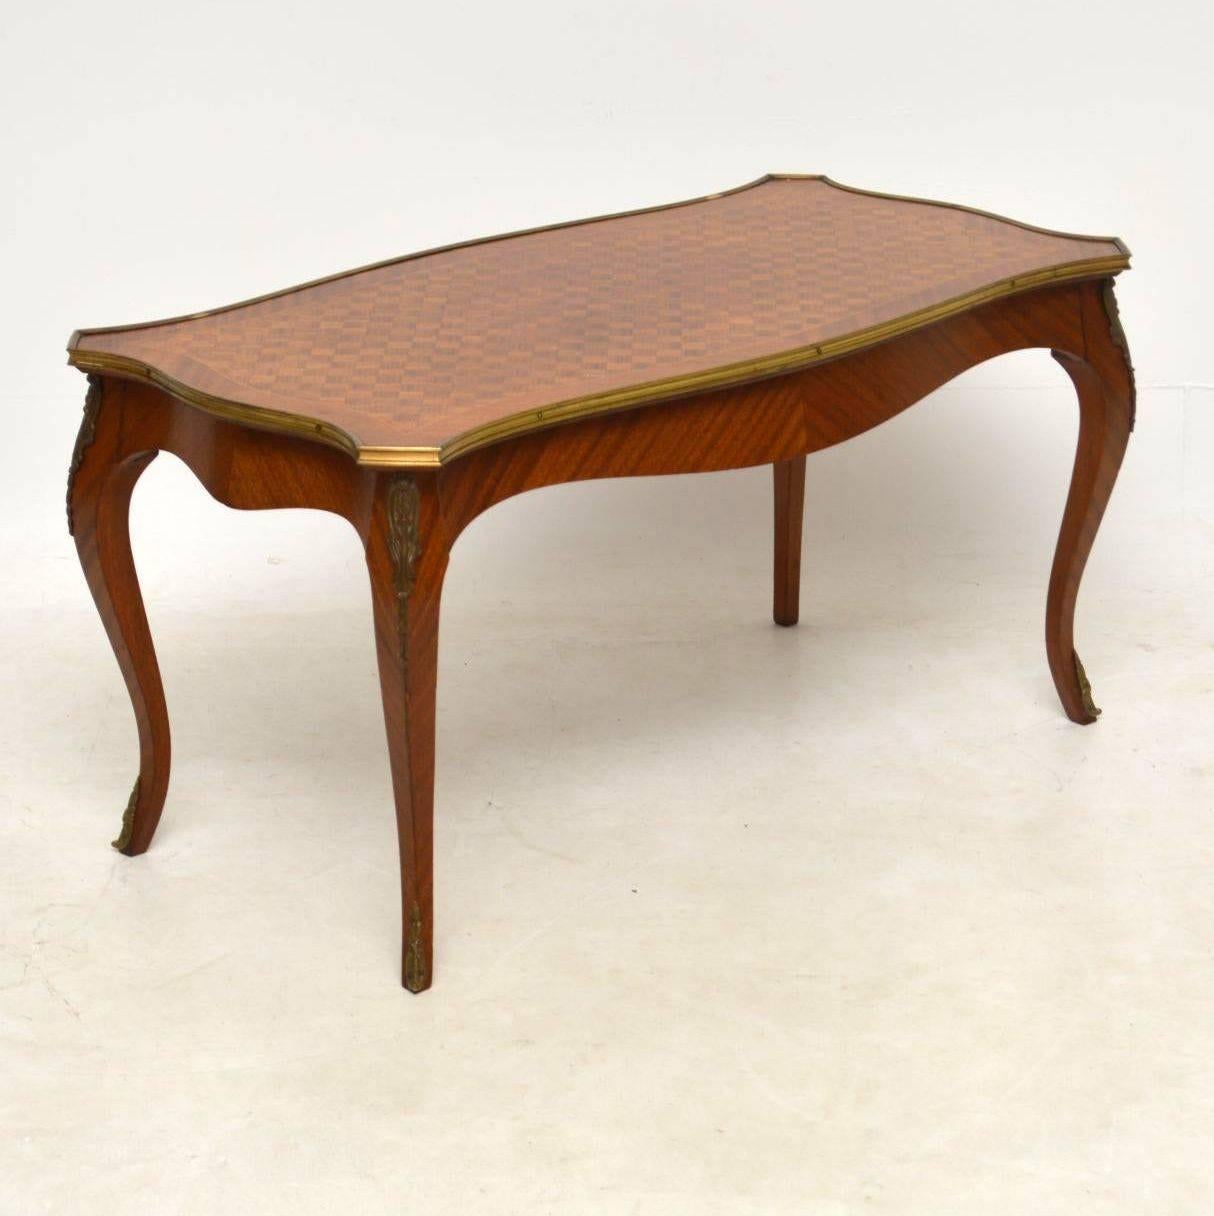 Louis XIV Antique French Inlaid Parquetry Coffee Table